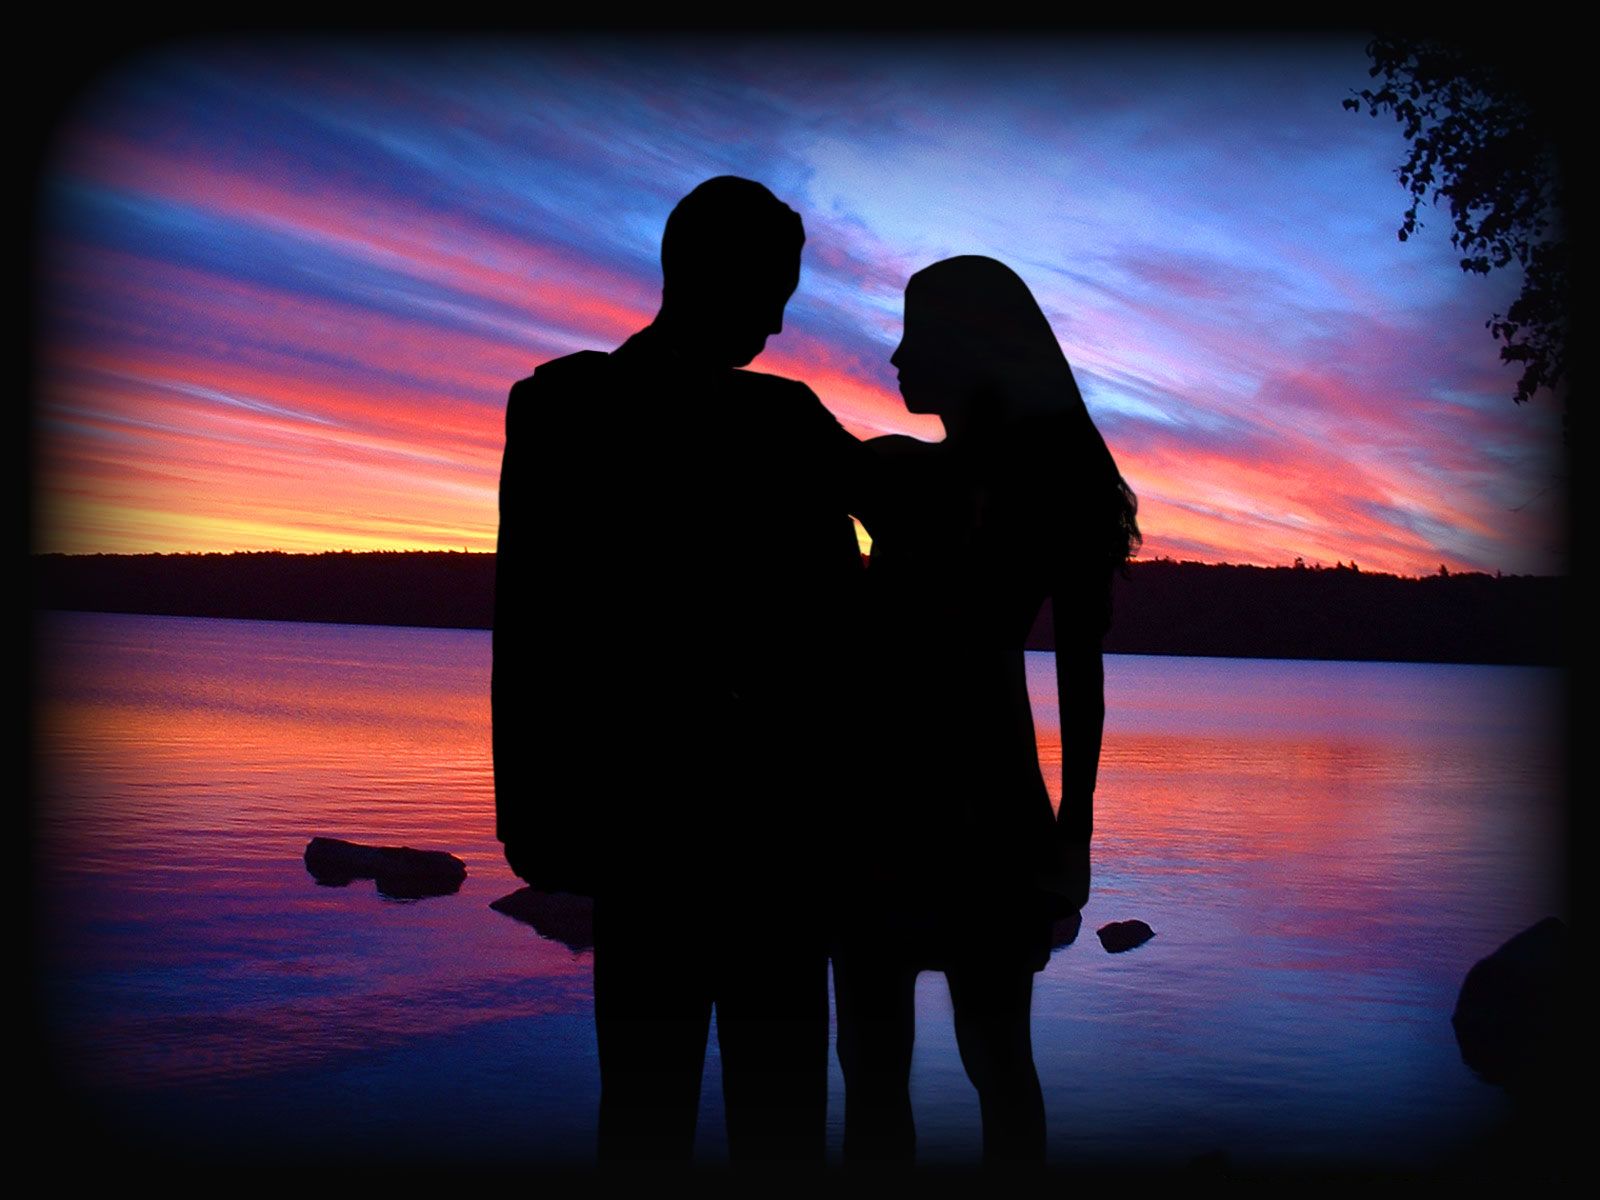 Love Romantic Images | Heart Images For Girlfriend or Boyfriend ...